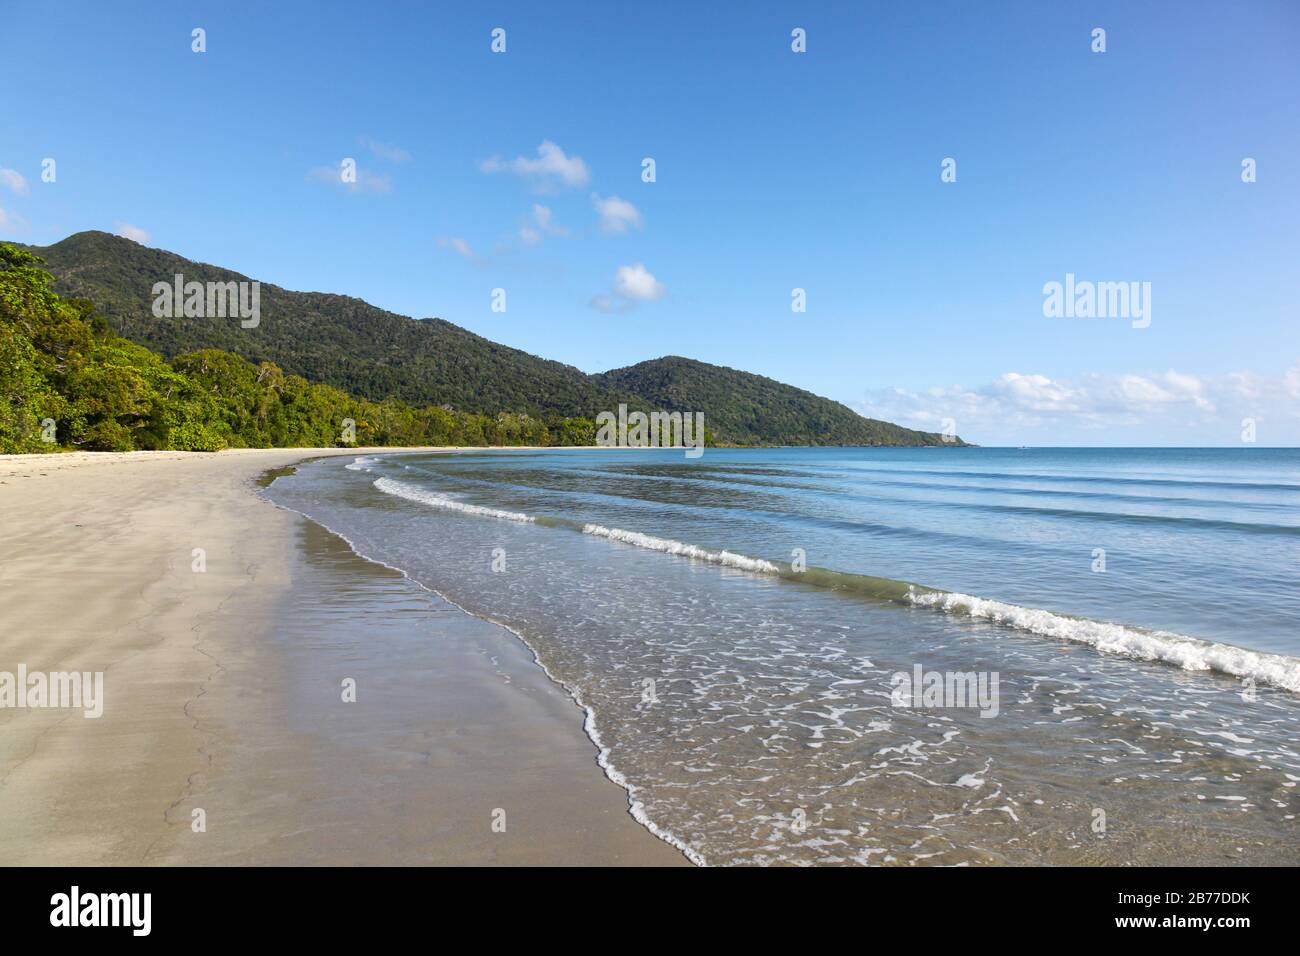 Empty beach at Cape Tribulation where the tropical rainforest runs right to the shoreline. The Daintree area north of Cairns is a beautiful location. Stock Photo